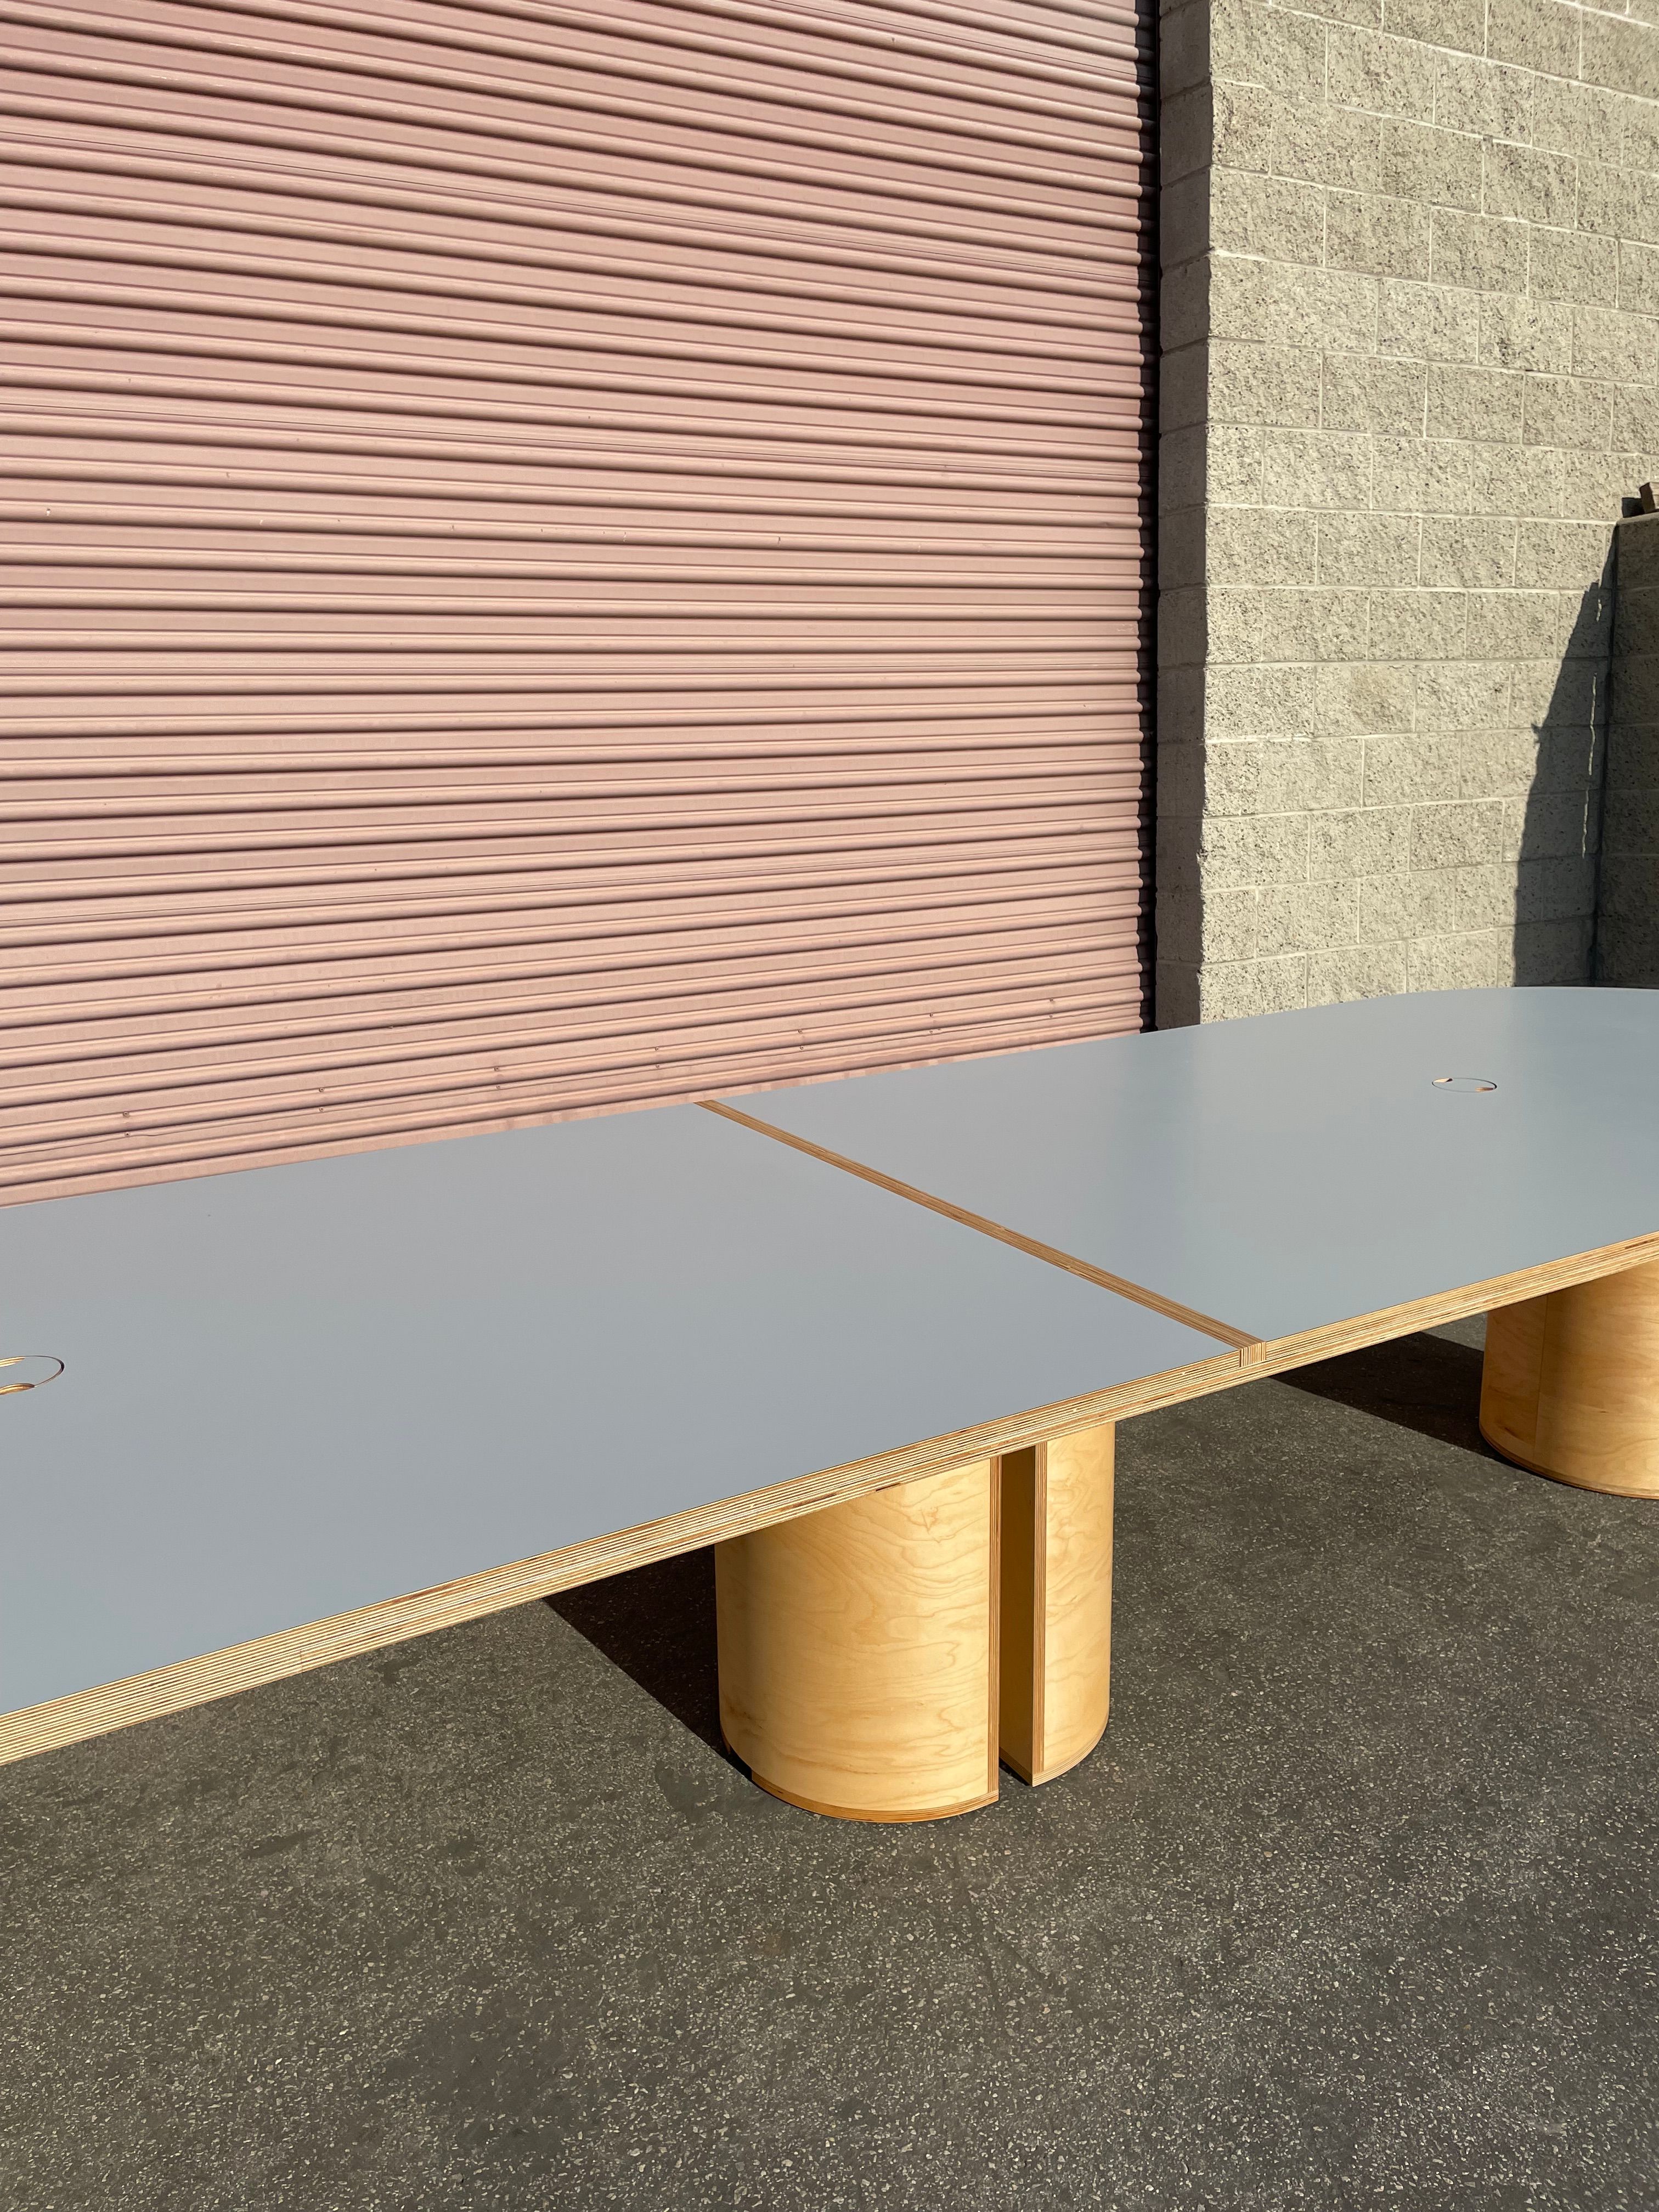  Conference Table - Annenberg Foundation product image 6